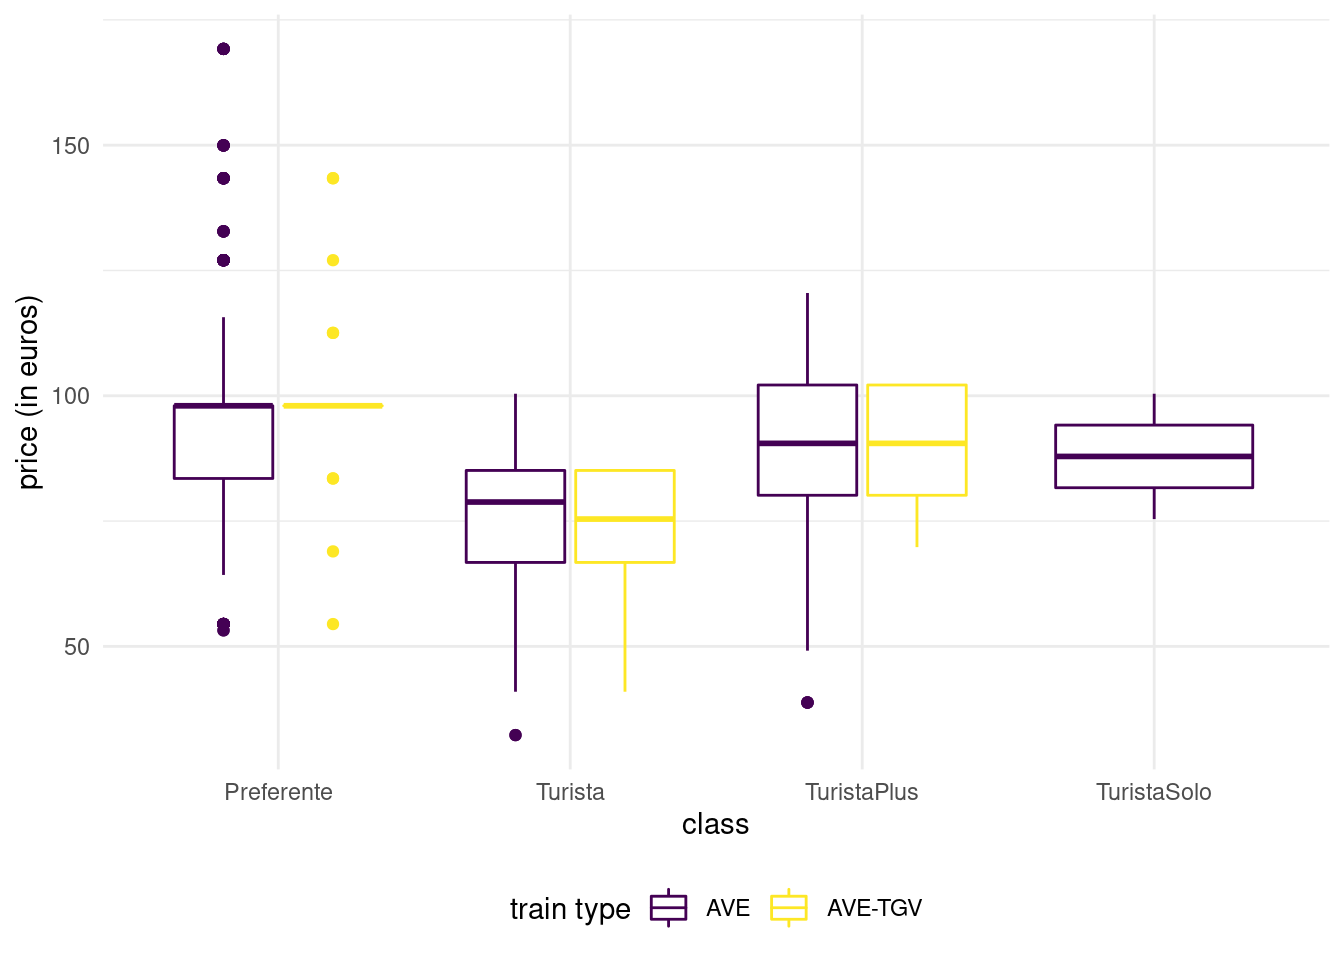 Box-and-whiskers plots for Promo fare tickets as a function of class and type for the Renfe tickets data.